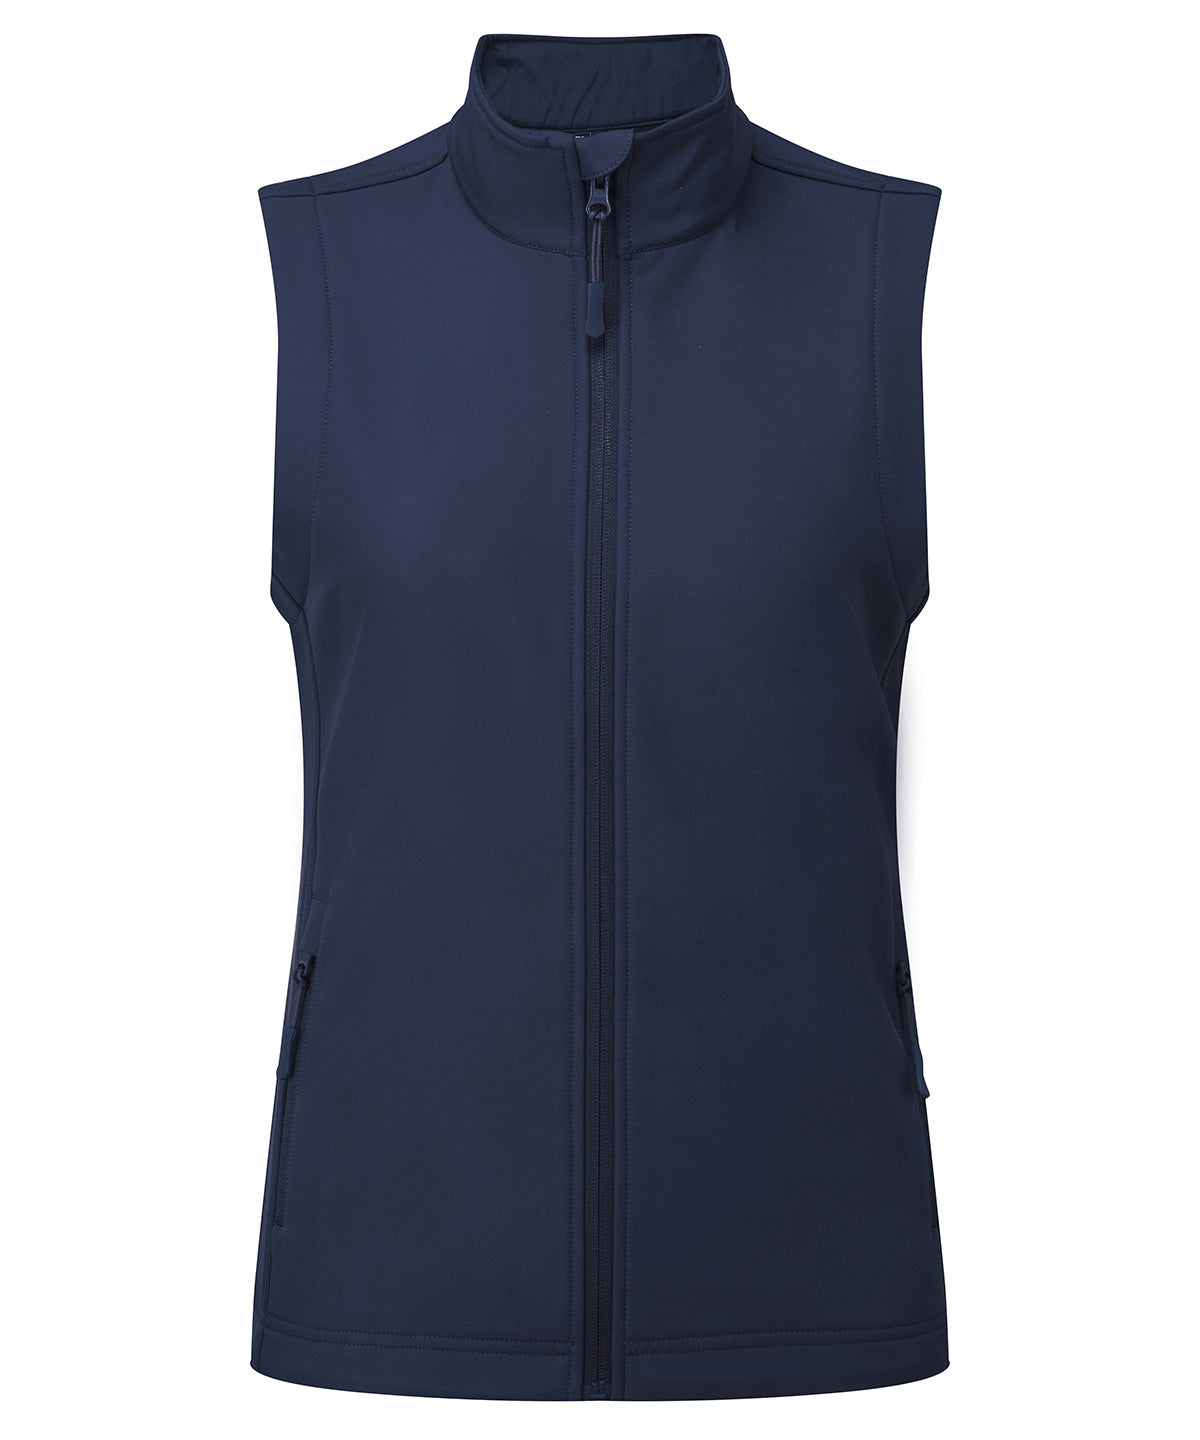 Women’s Windchecker® printable and recycled gilet